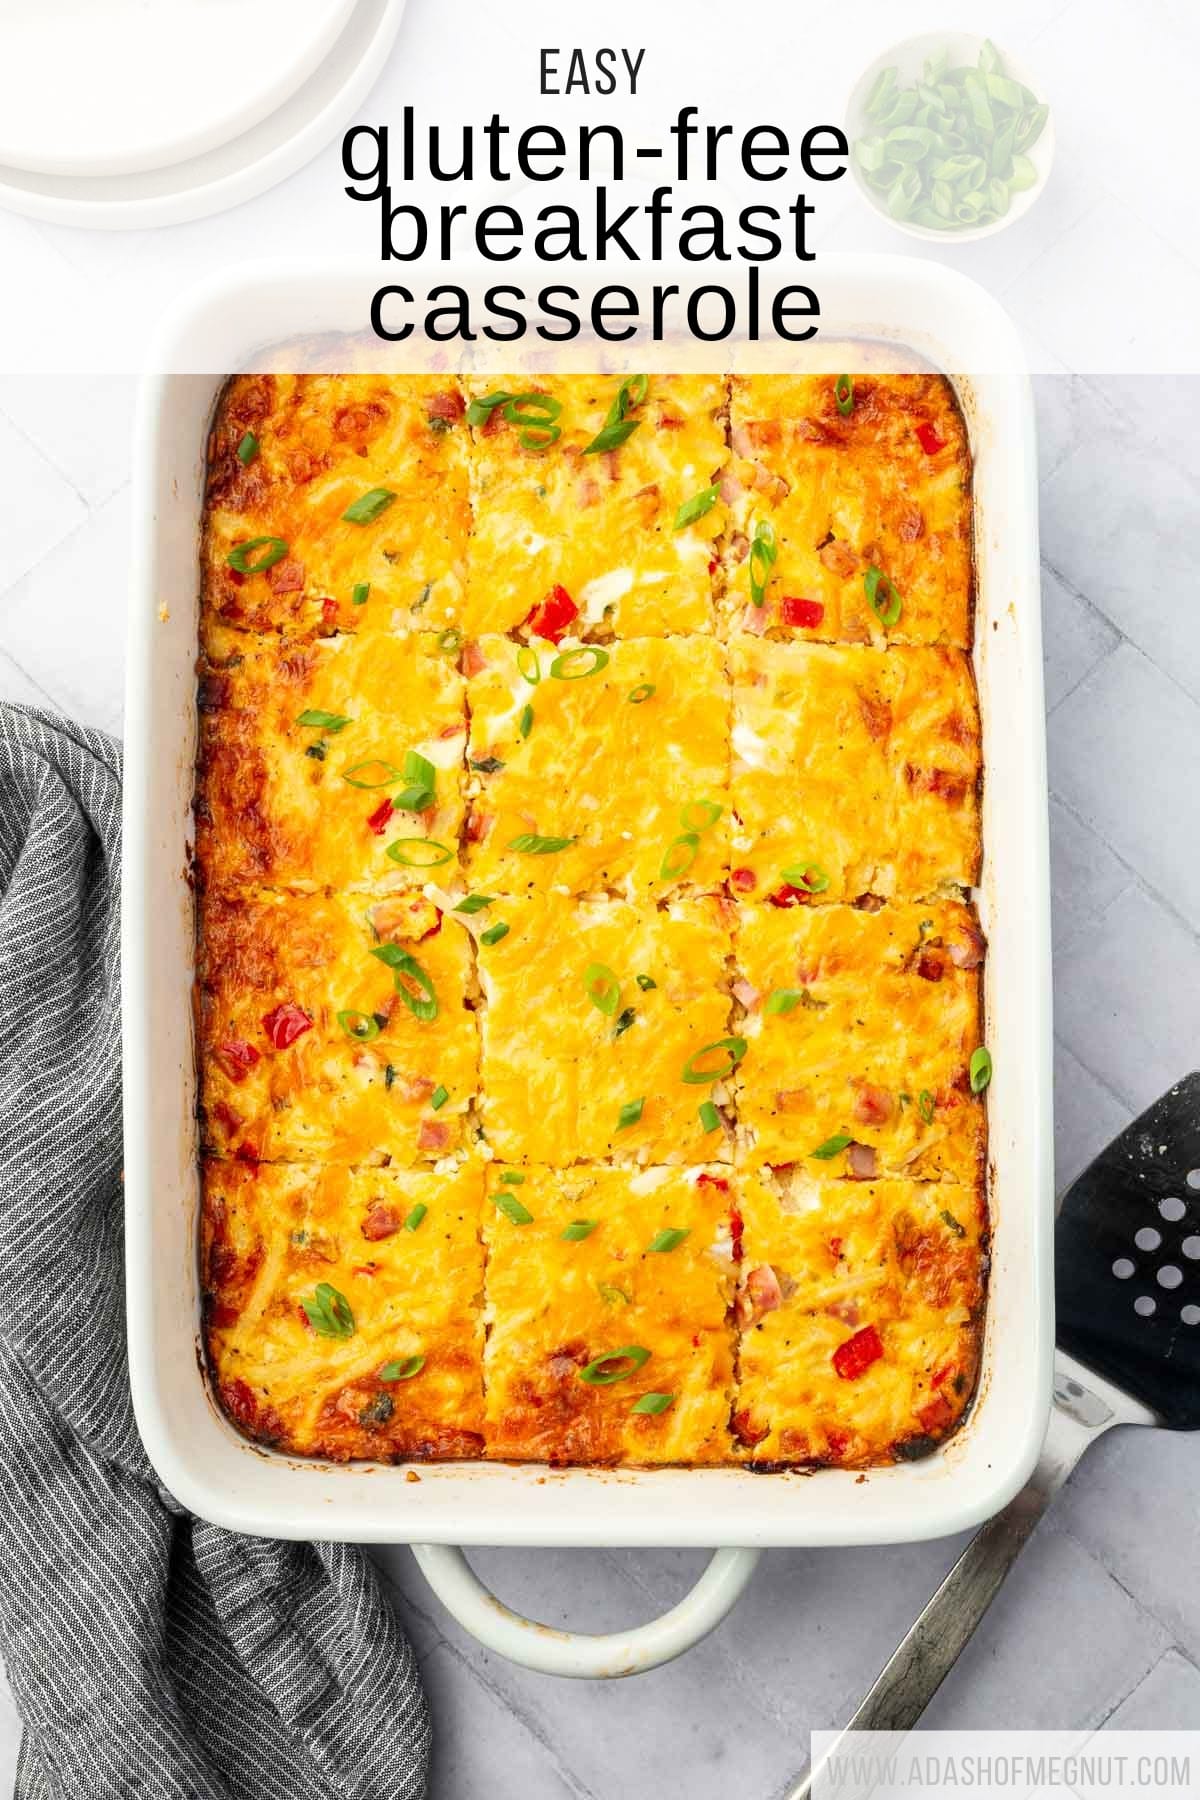 An overhead view of a casserole dish filled with gf breakfast casserole topped with green onions and a spatula to the side.